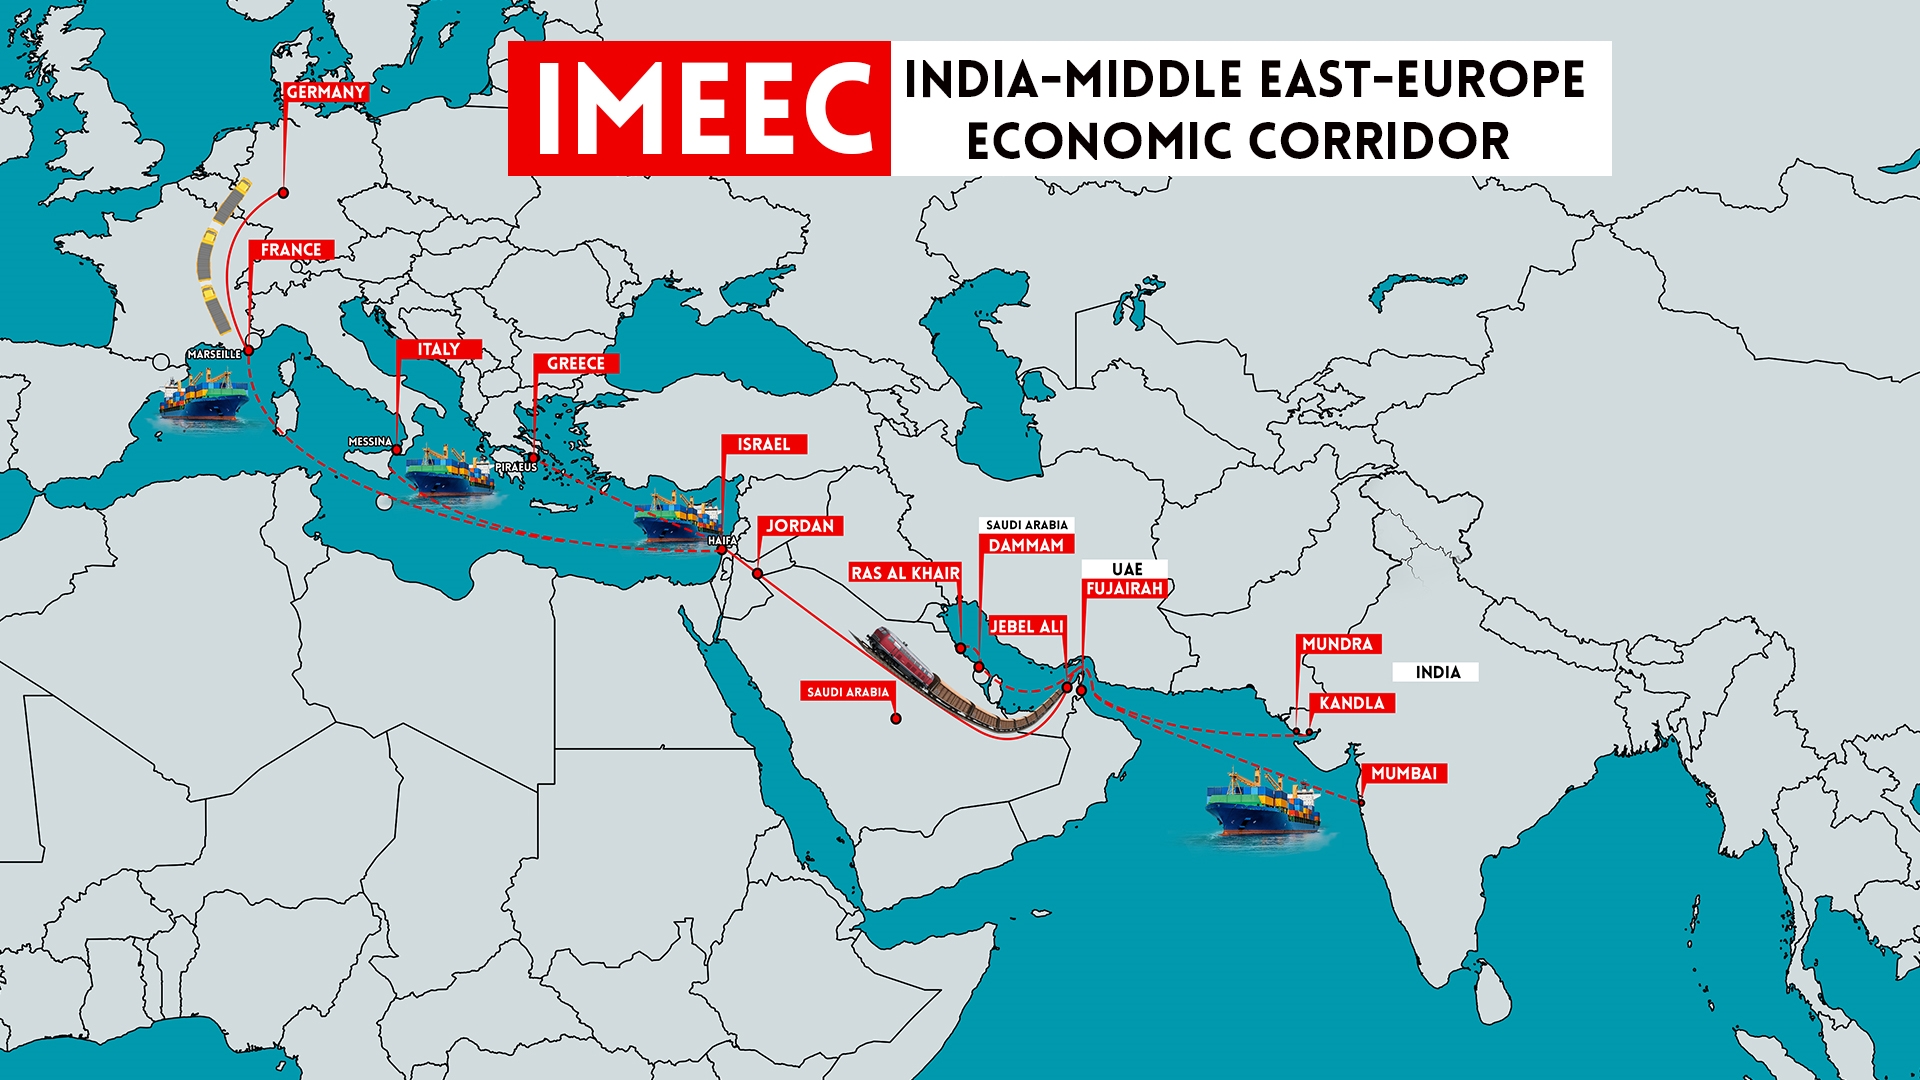 India and the United Arab Emirates (UAE) on February 1, 2024 signed an agreement on the India-Middle East-Europe Economic Corridor (IMEEC), a historic trade route for hundreds of years between the Indian subcontinent, the Middle East and Europe.